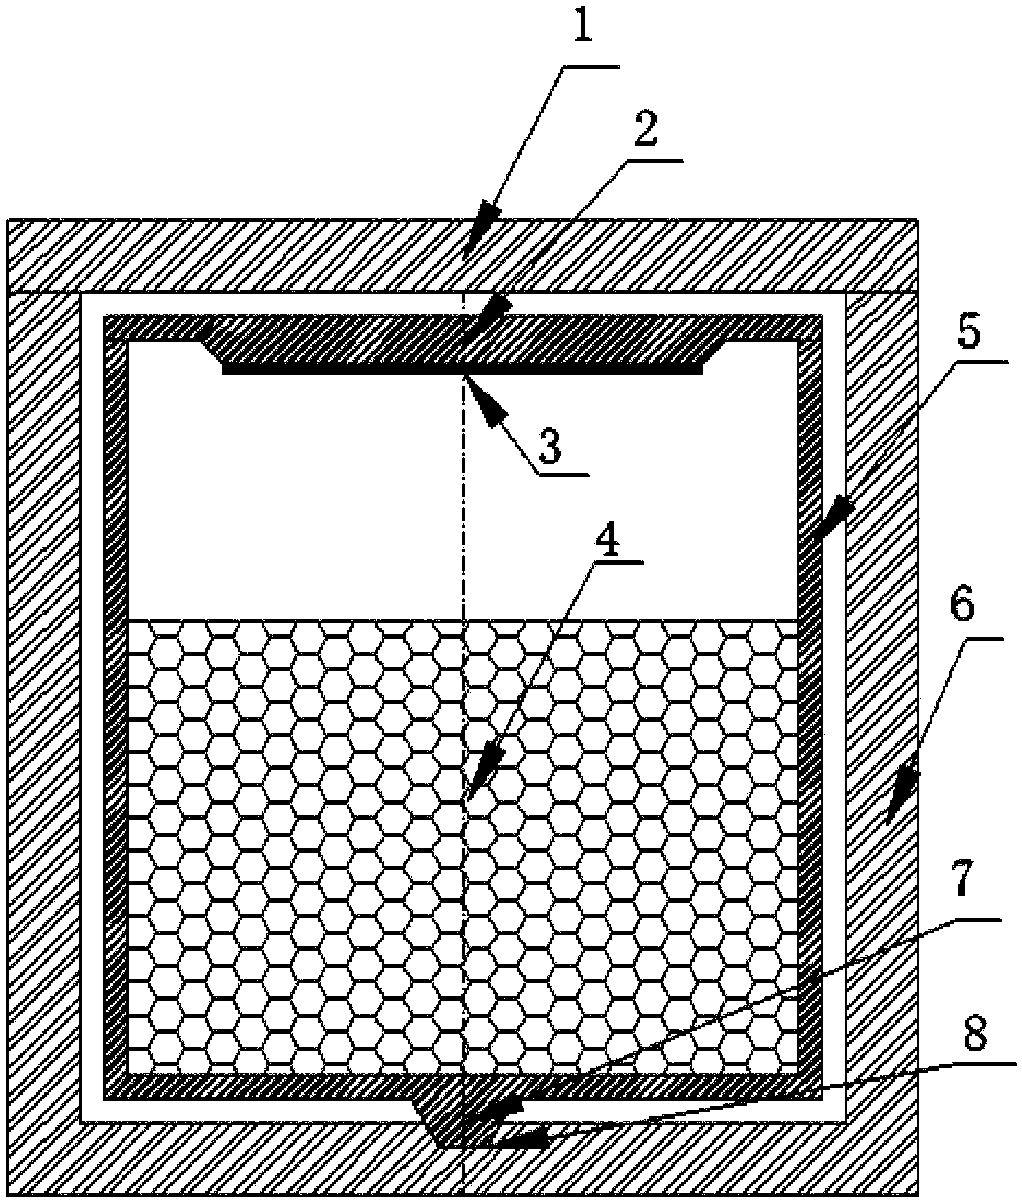 Crucible for silicon carbide single crystal growing close to equilibrium state and growing method of silicon carbide single crystal